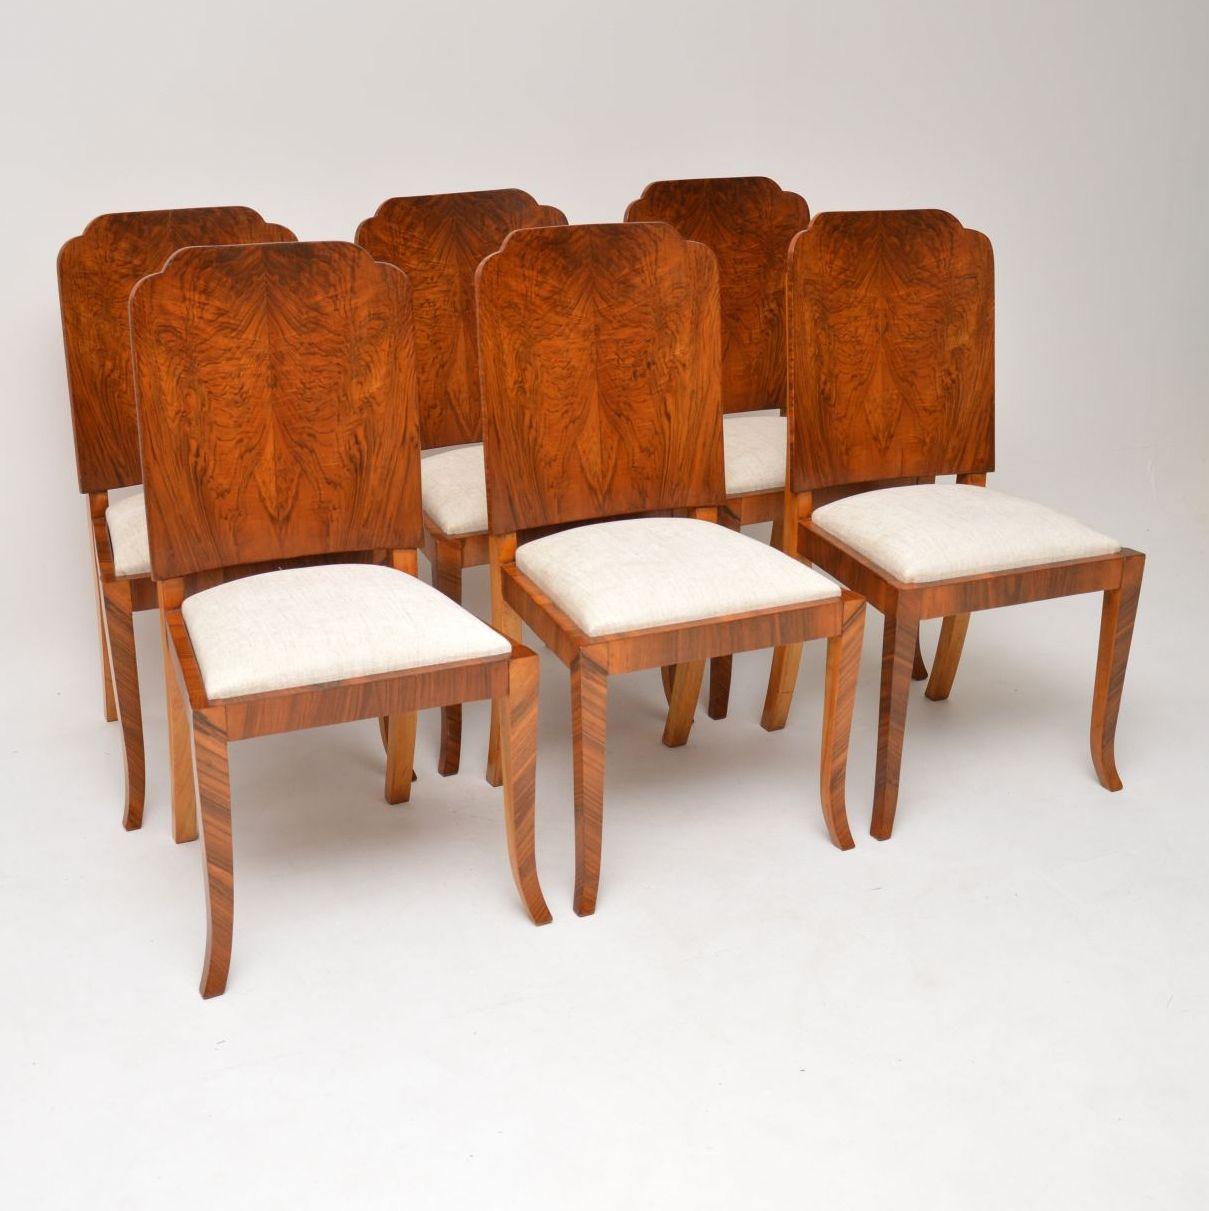 English 1920s Original Art Deco Walnut Dining Table and Chairs